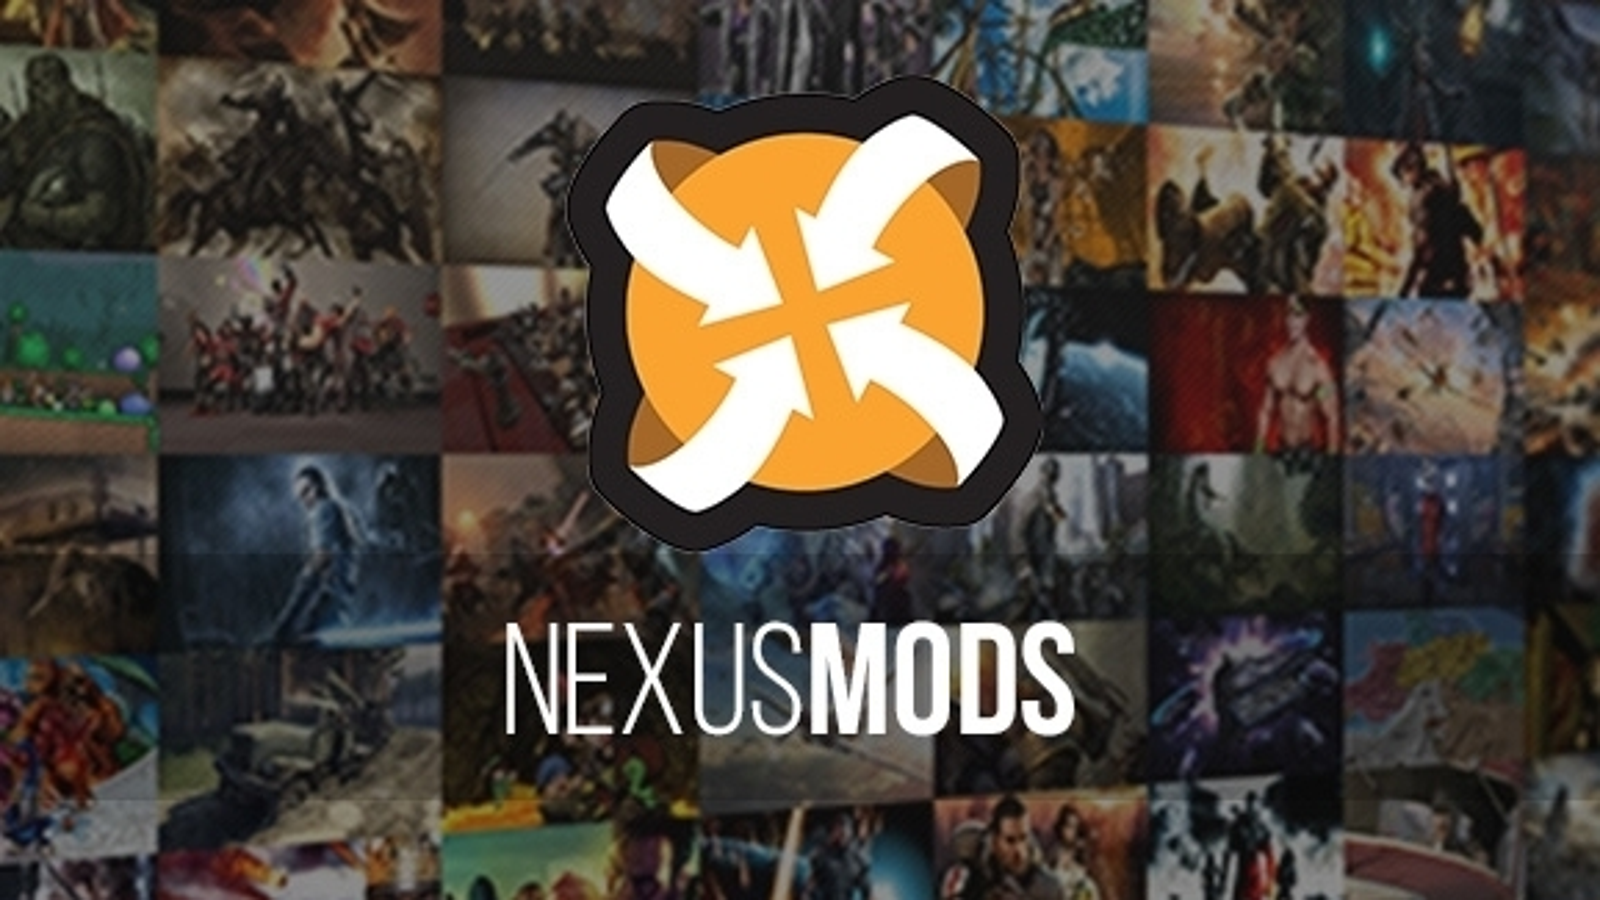 How to Use Nexus Mod Manager to Download, Install, Remove, and